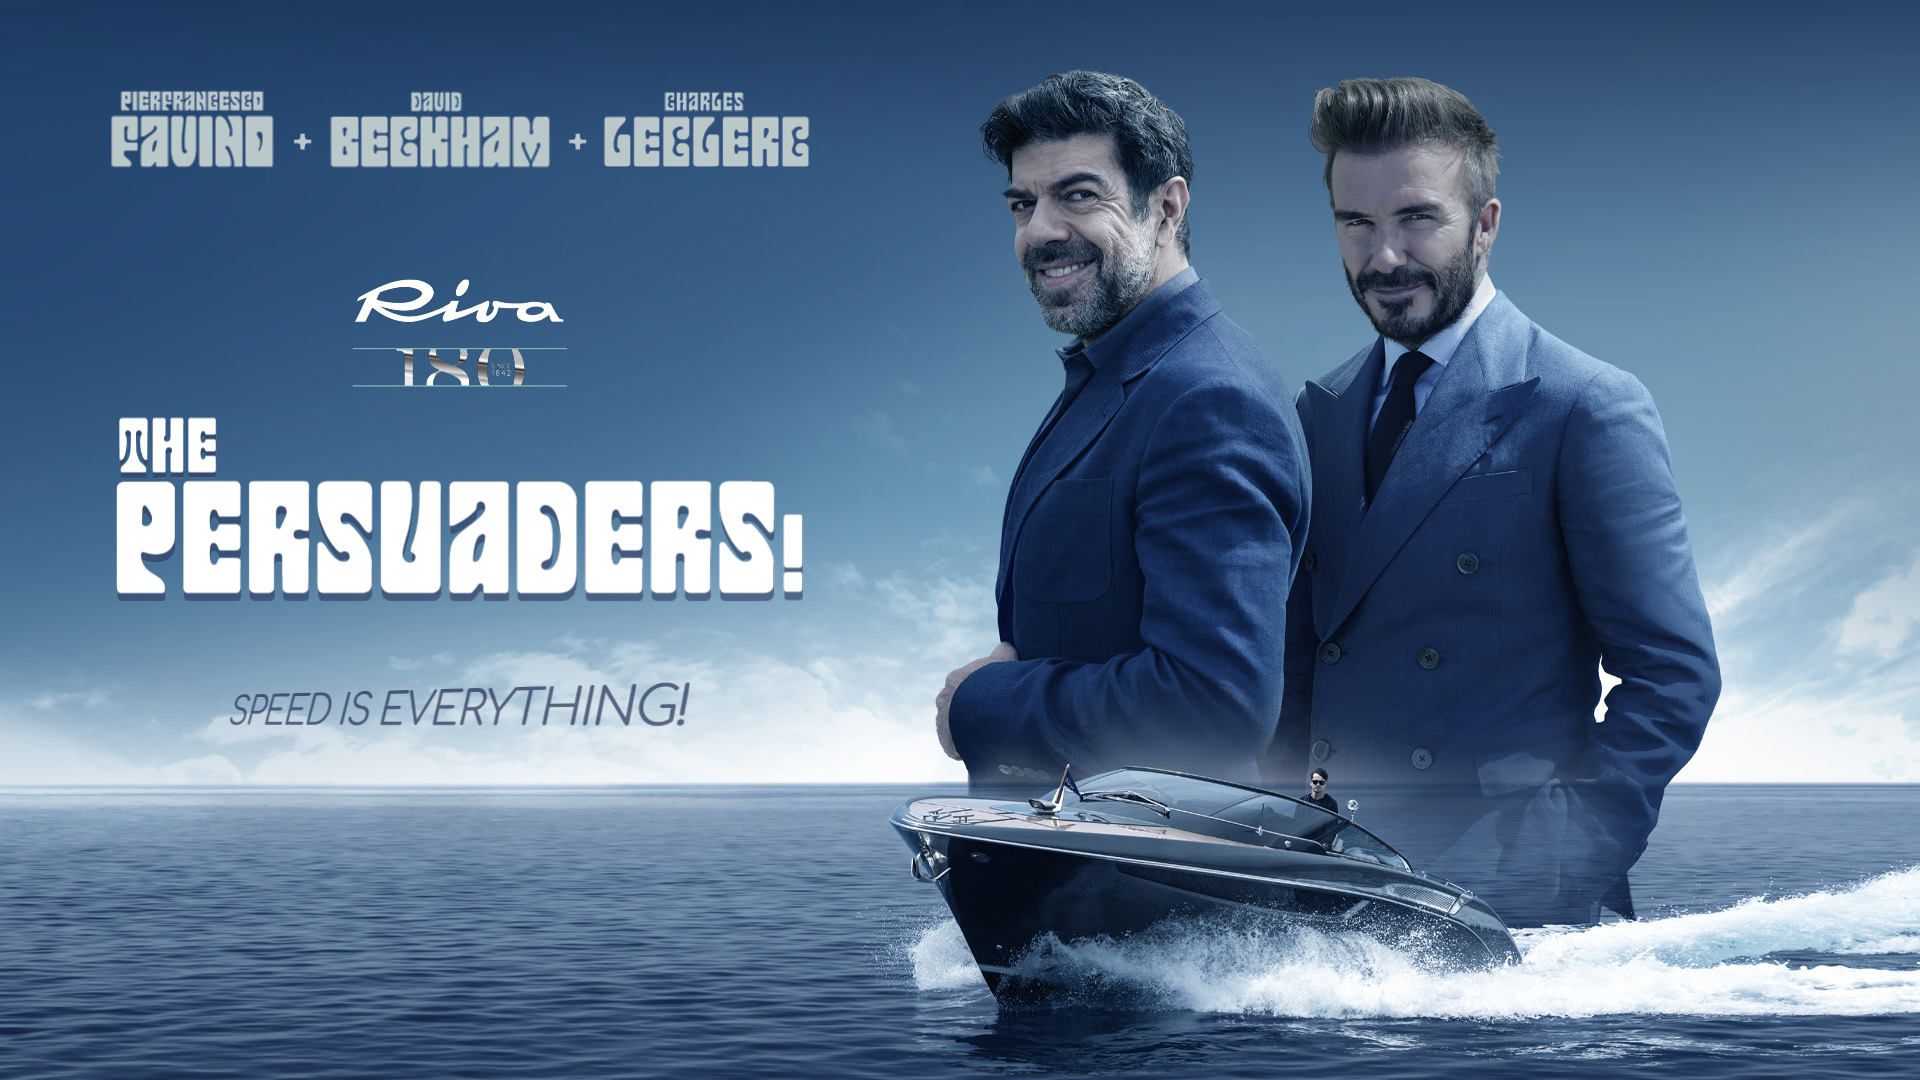 David Beckham, Charles Leclerc, and Pierfrancesco Favino in the film 'Riva the Persuaders' 